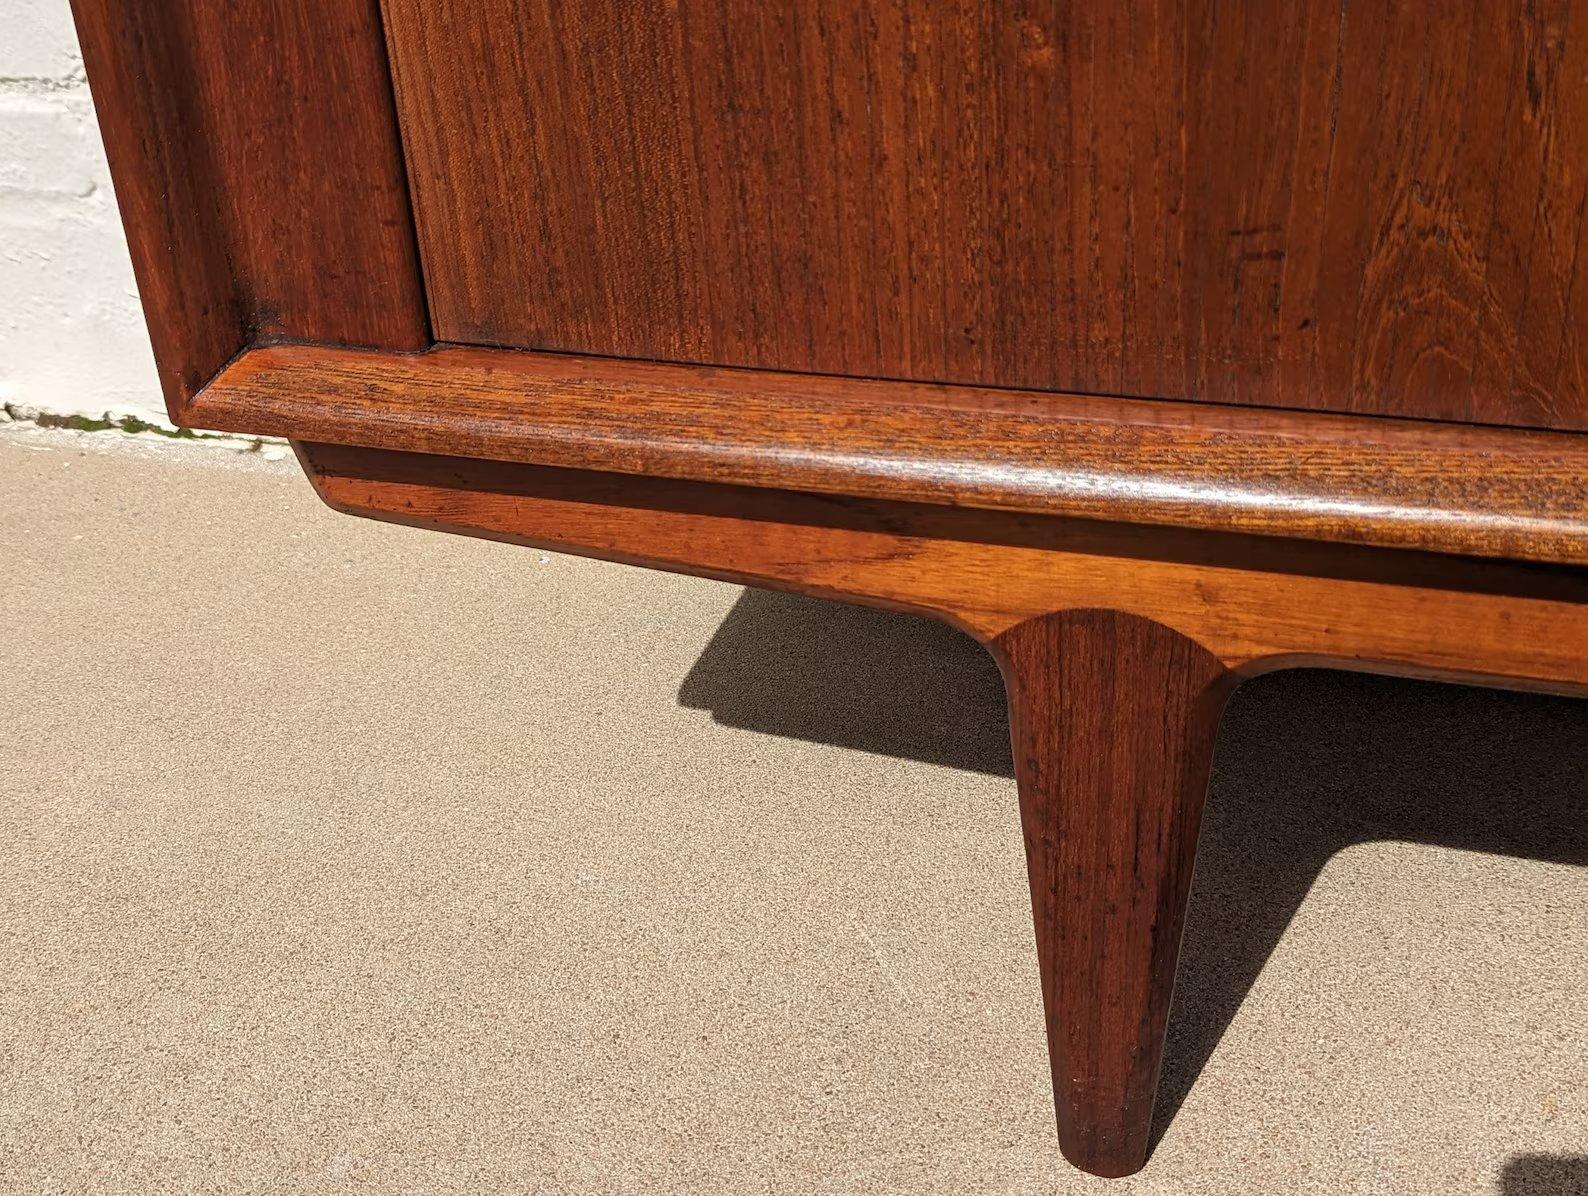 Mid Century Danish Modern Teak Credenza by Bernhard Pedersen and Sons
 
Above average vintage condition and structurally sound. Has some expected slight finish wear and scratching. Top and front trim have been refinished. Both vertical sides of